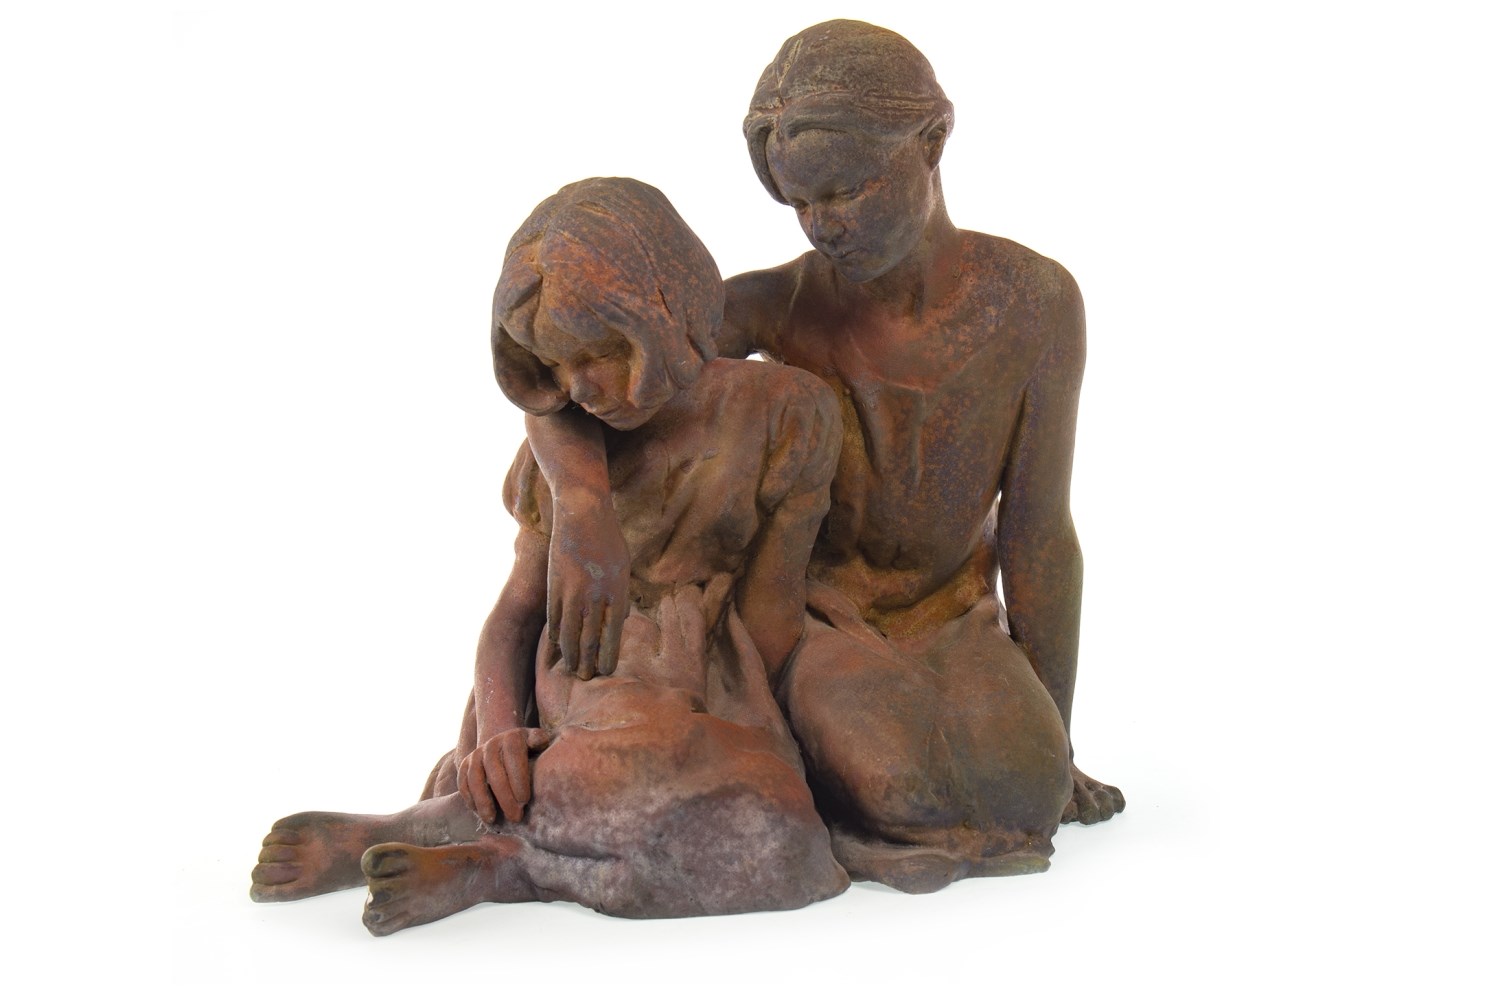 THE SISTERS, A SCULPTURE BY WALTER AWLSON